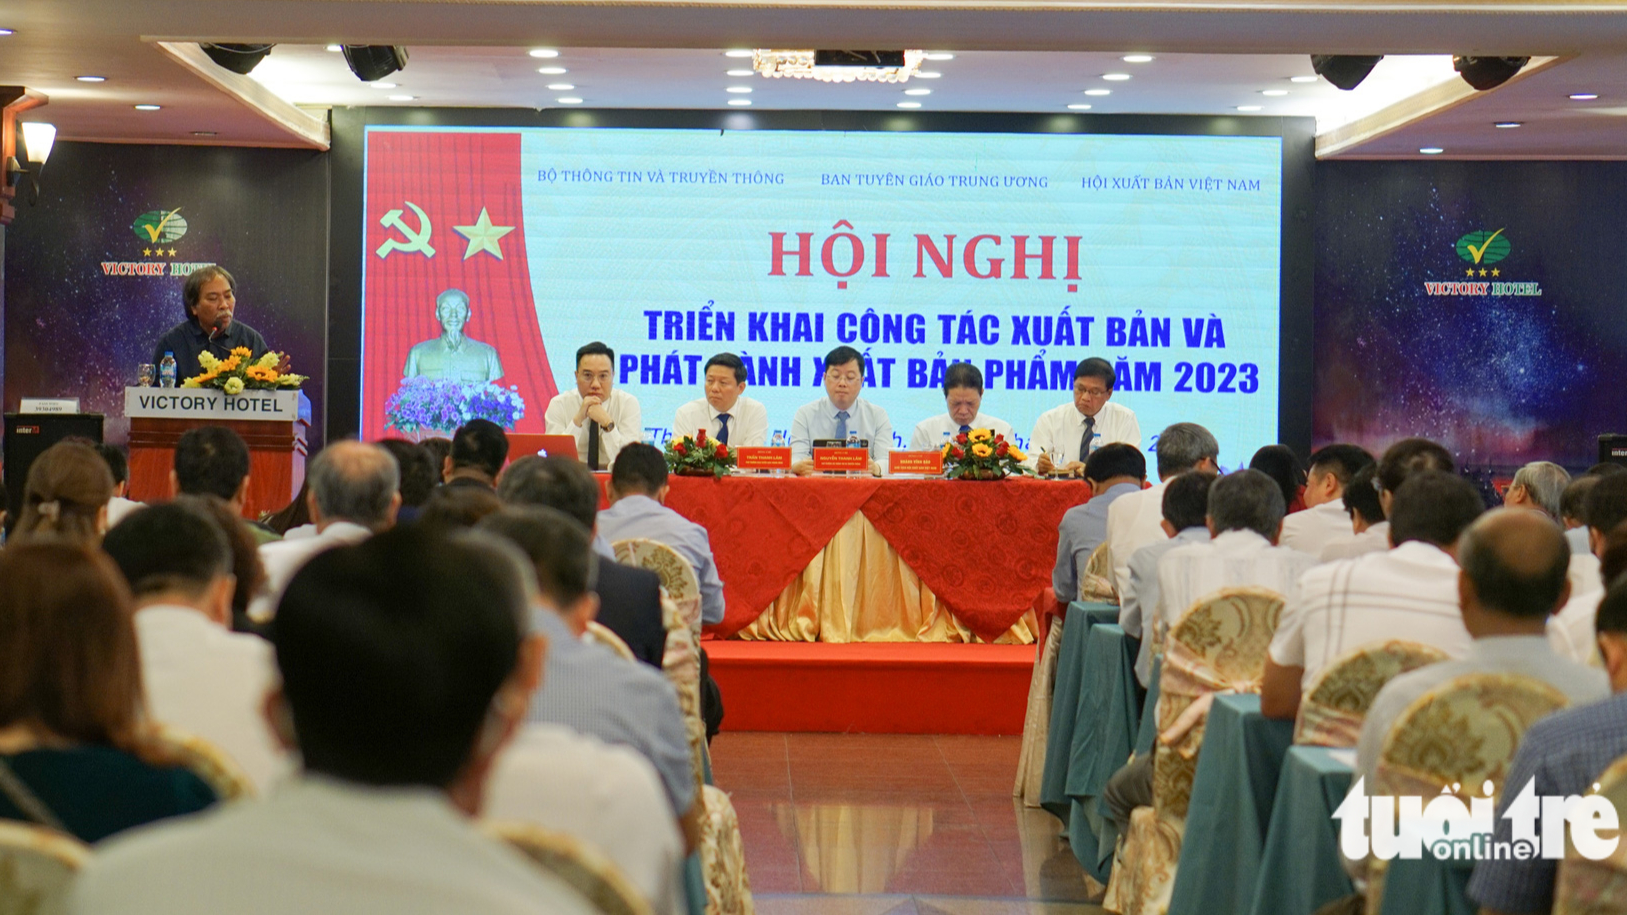 Delegates attend a conference held by the Authority of Publication, Printing and Distribution under the Ministry of Information and Communications in Ho Chi Minh City on February 17, 2023. Photo: Tran Mac / Tuoi Tre